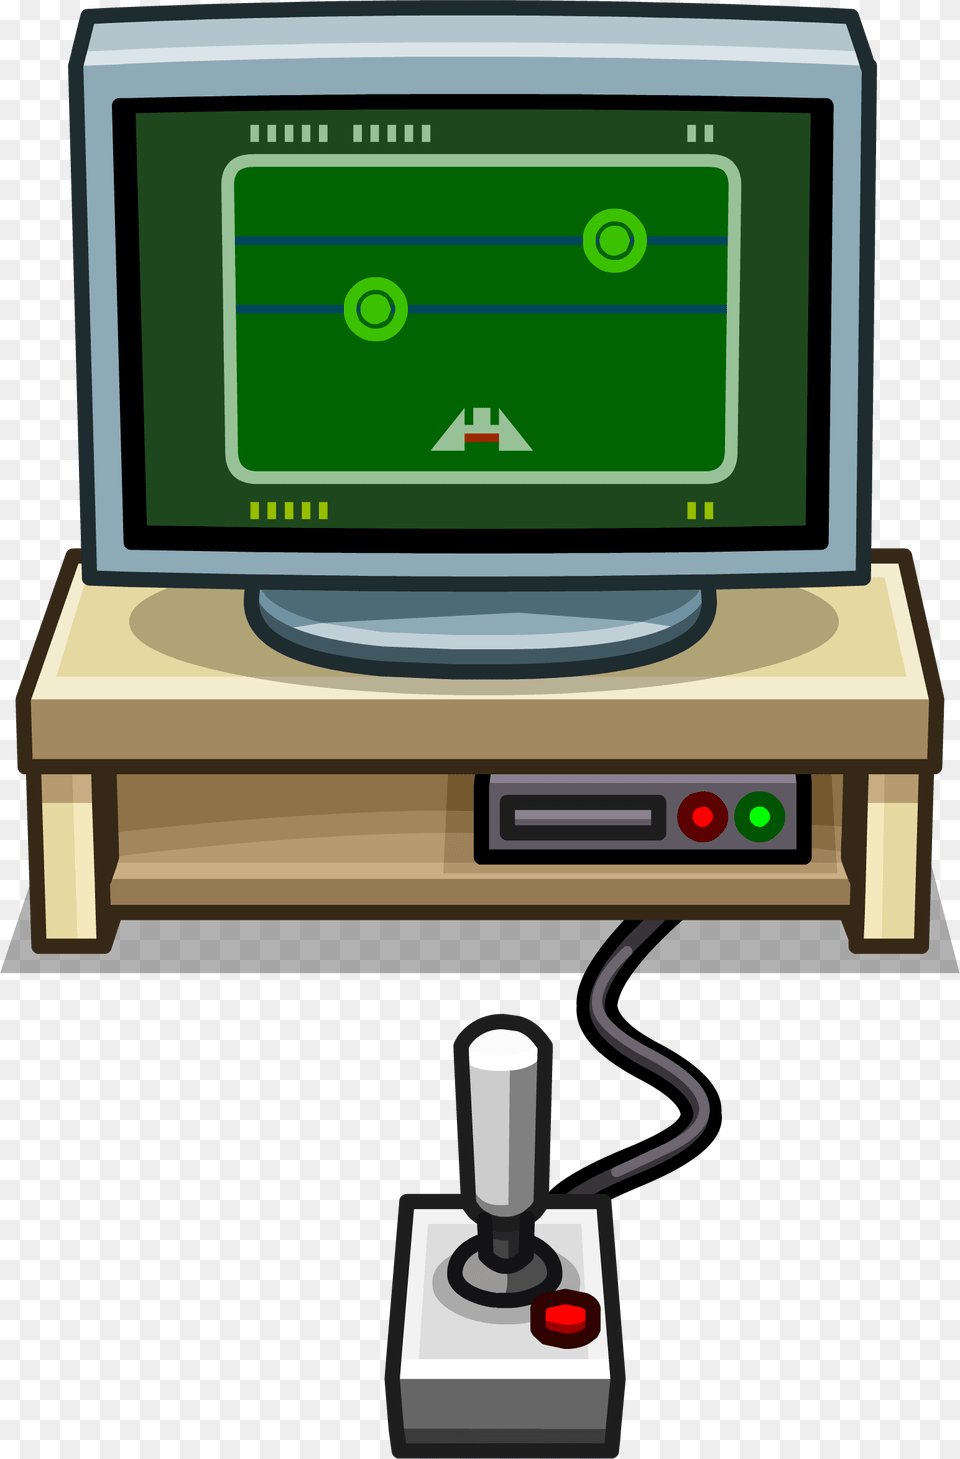 Gray Tv Stand Sprite 009 Cartoon Tv Stand, Electronics, Computer, Pc, Computer Hardware Png Image